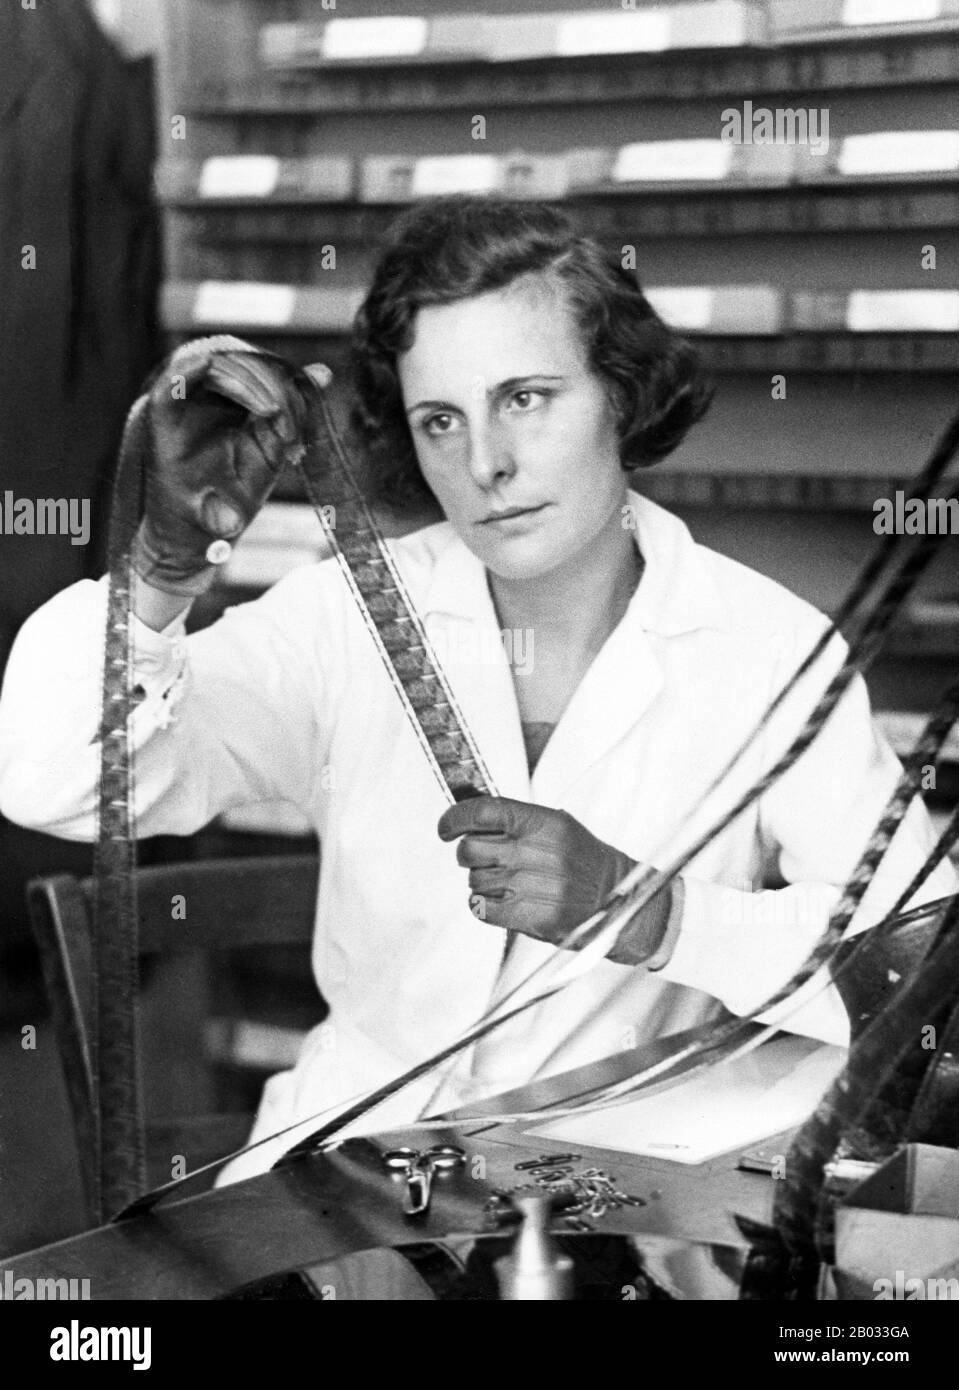 Helene Bertha Amalie 'Leni' Riefenstahl (22 August 1902 – 8 September 2003) was a German film director, producer, screenwriter, editor, photographer, actress, dancer, and propagandist for the Nazis. Stock Photo